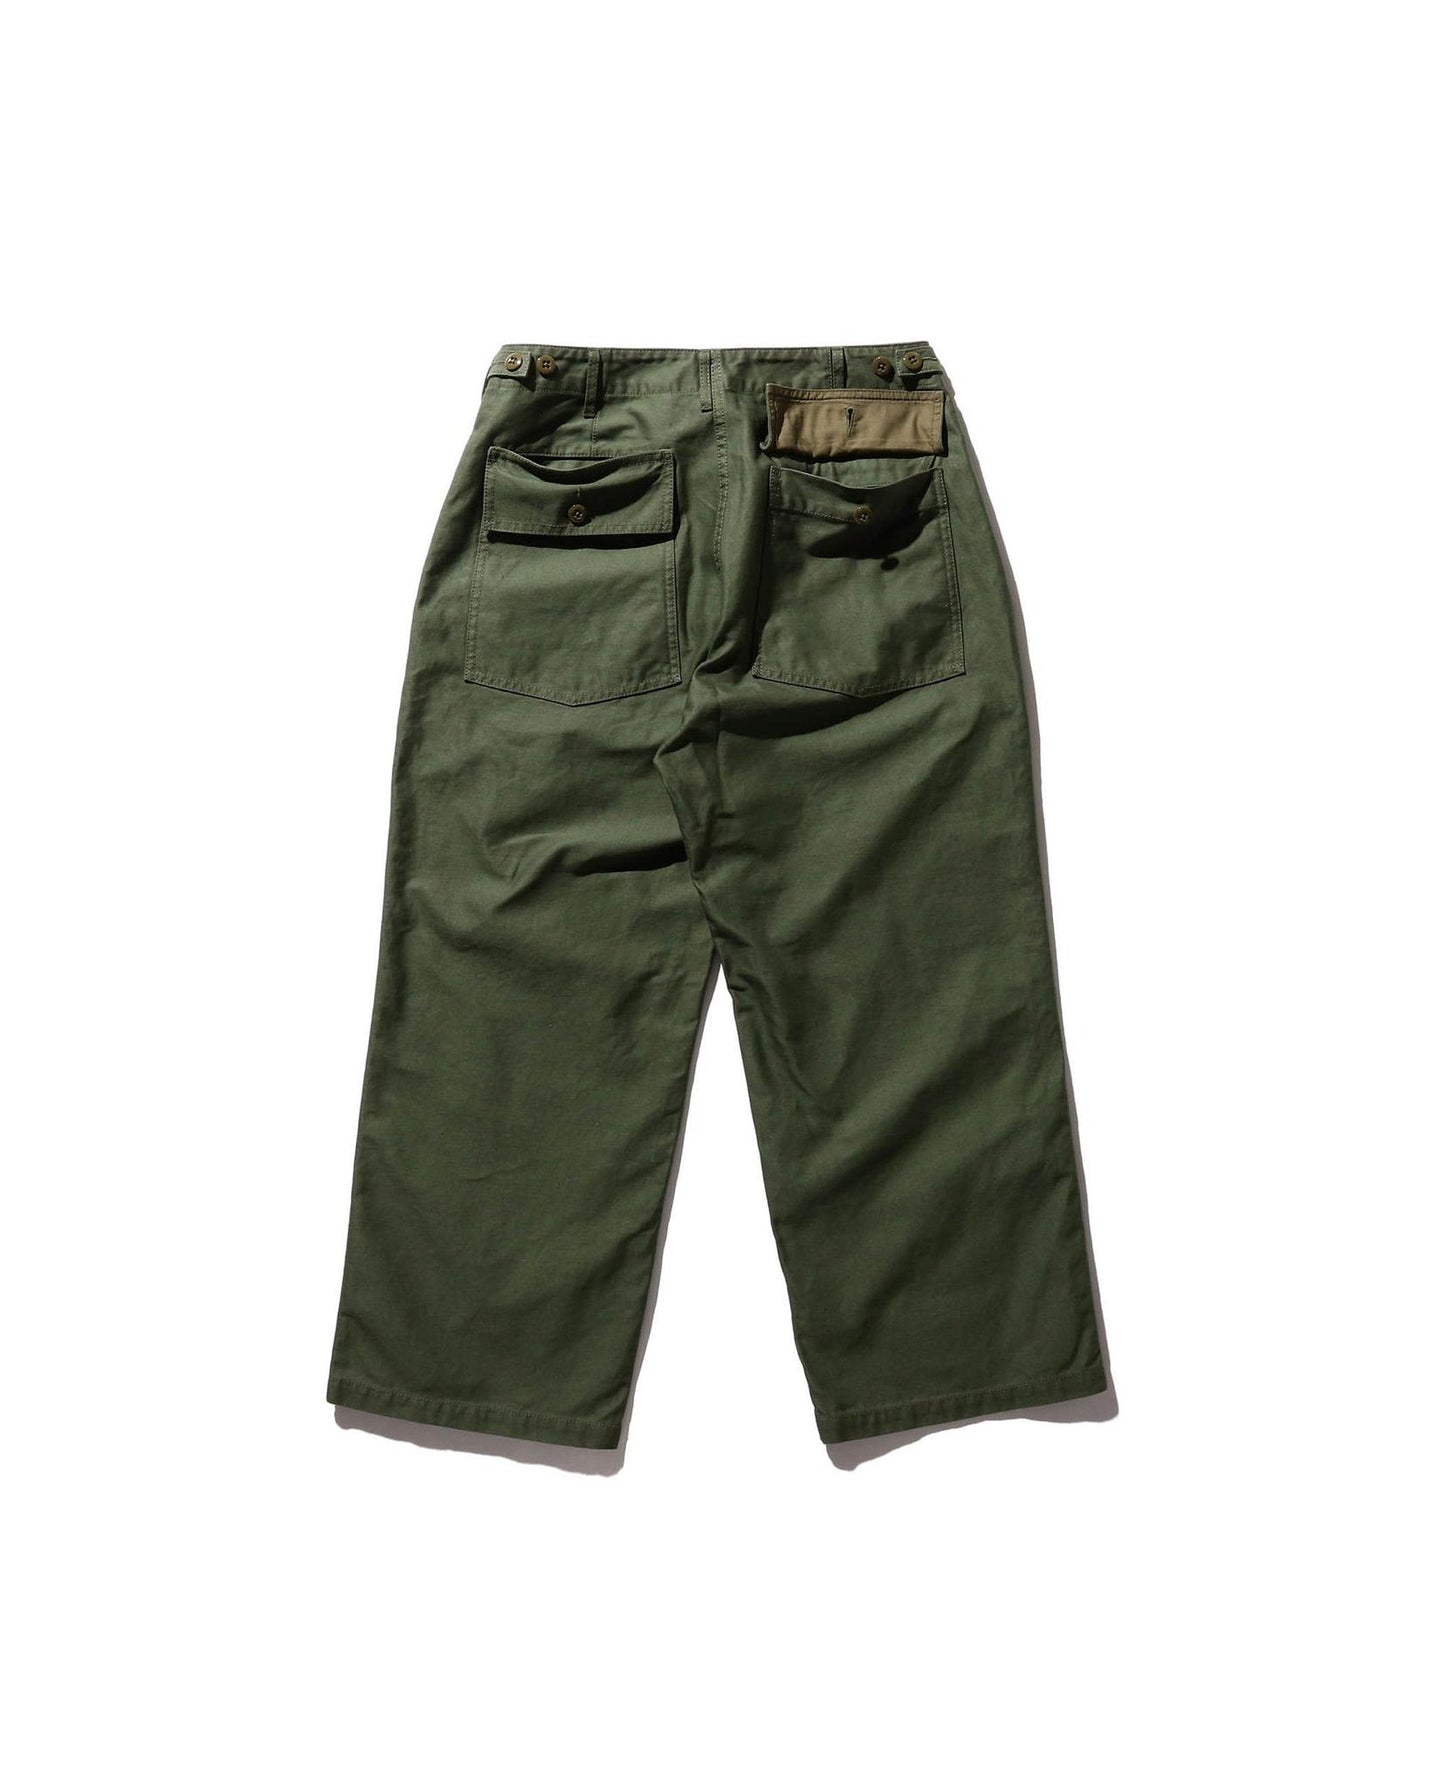 Beams Plus MIL Utility Trousers | STASHED